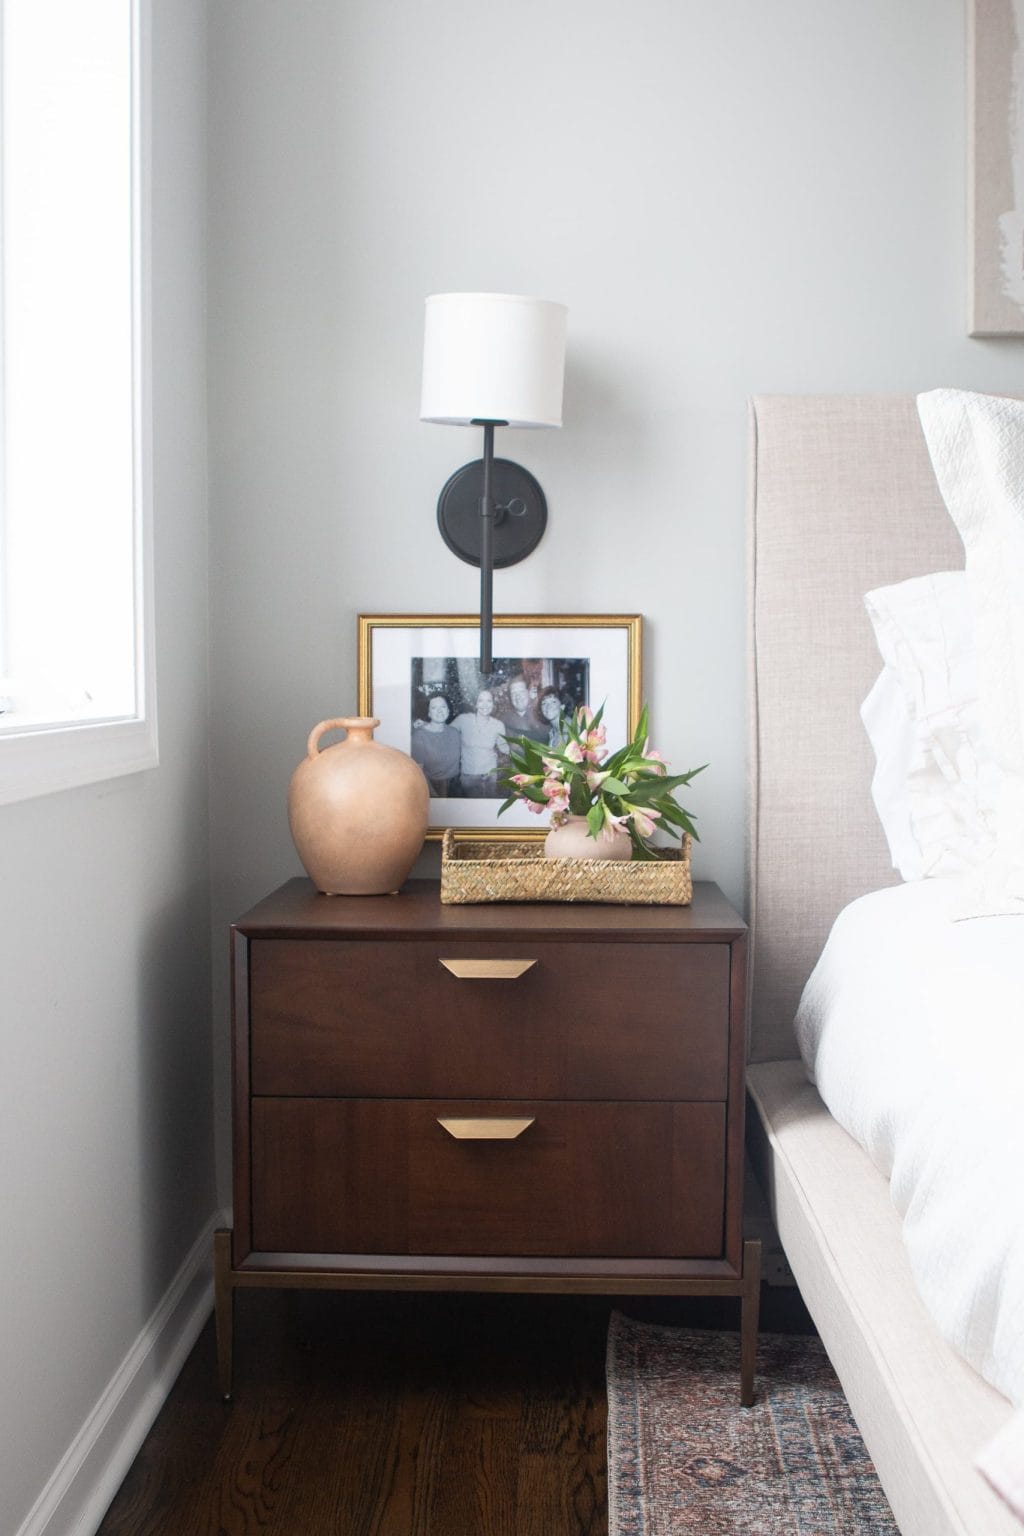 New wood nightstands for this bright bedroom makeover